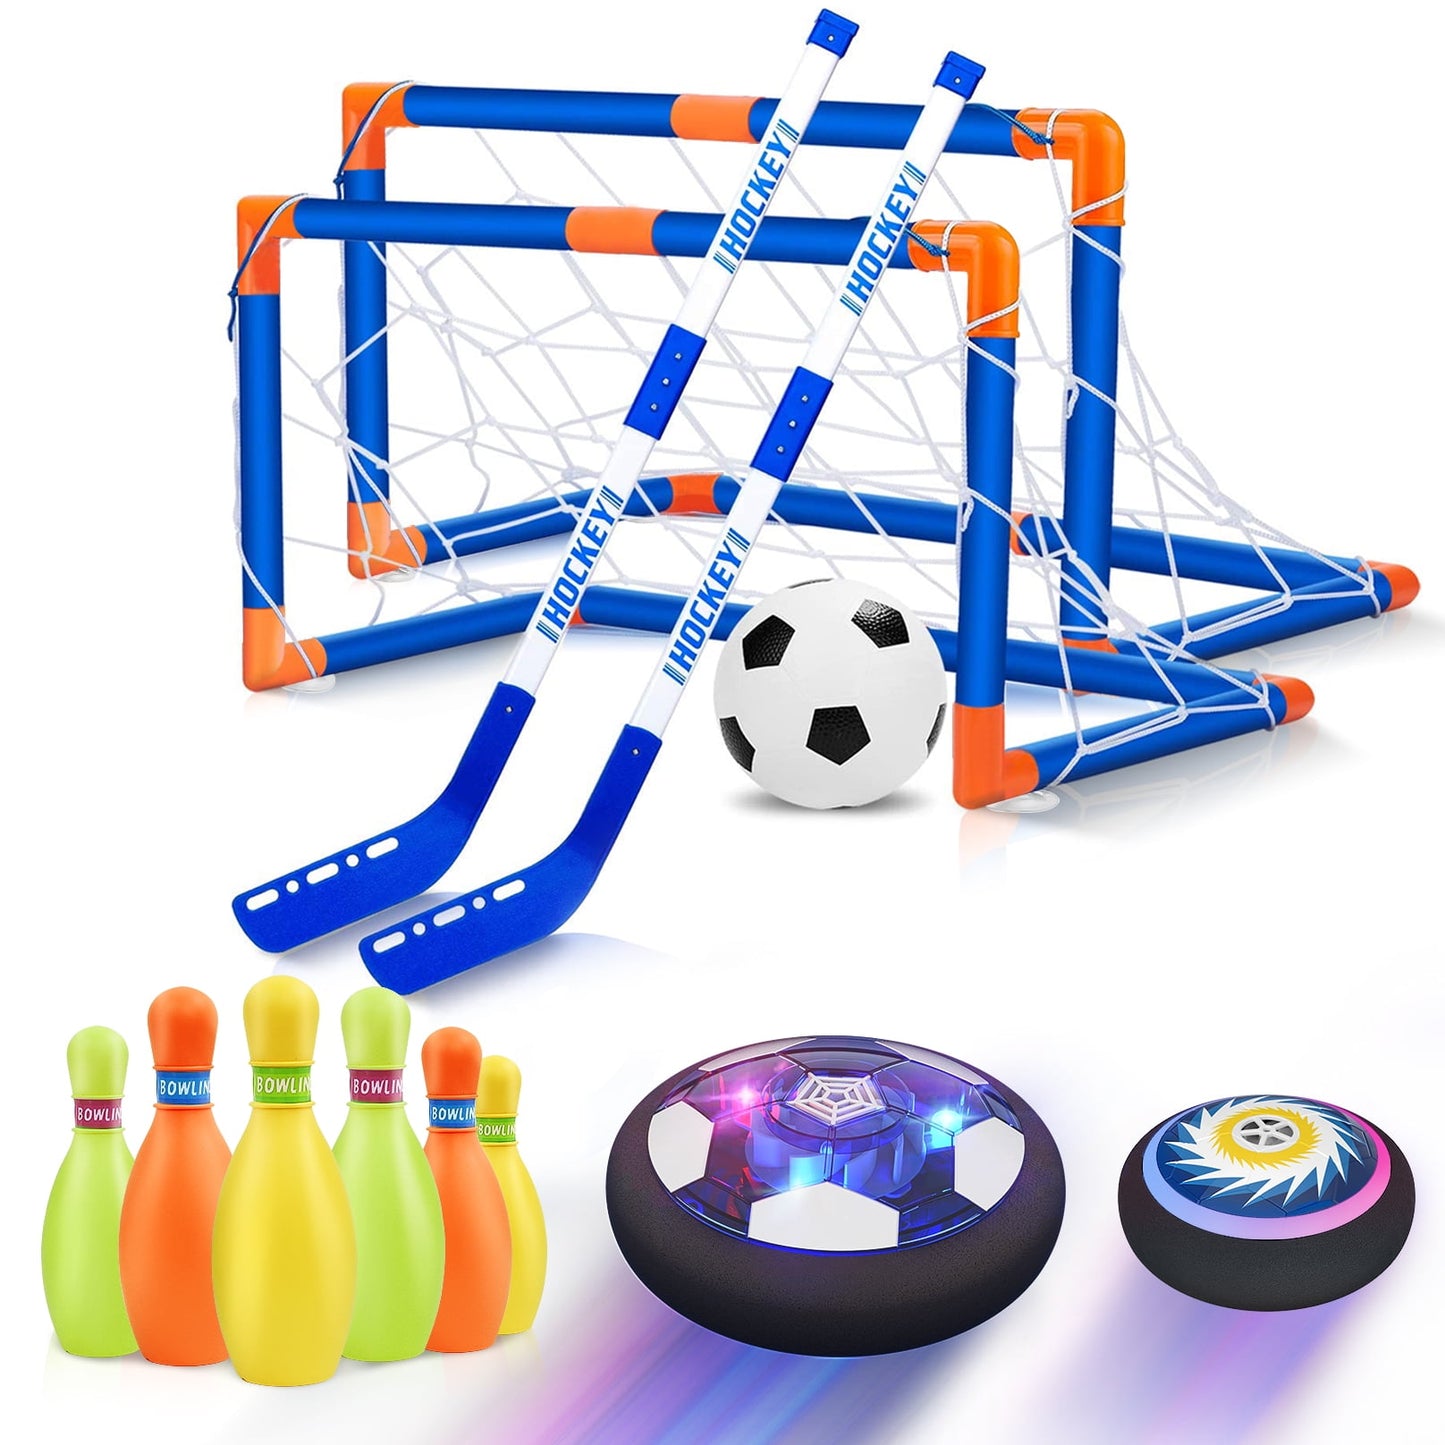 Hover Soccer Ball Set with 2 Goals, 3-in-1 LED Soccer Hockey Bowling Set Indoor/Outdoor Toys Gifts for Kids Boys Girls Ages 3+